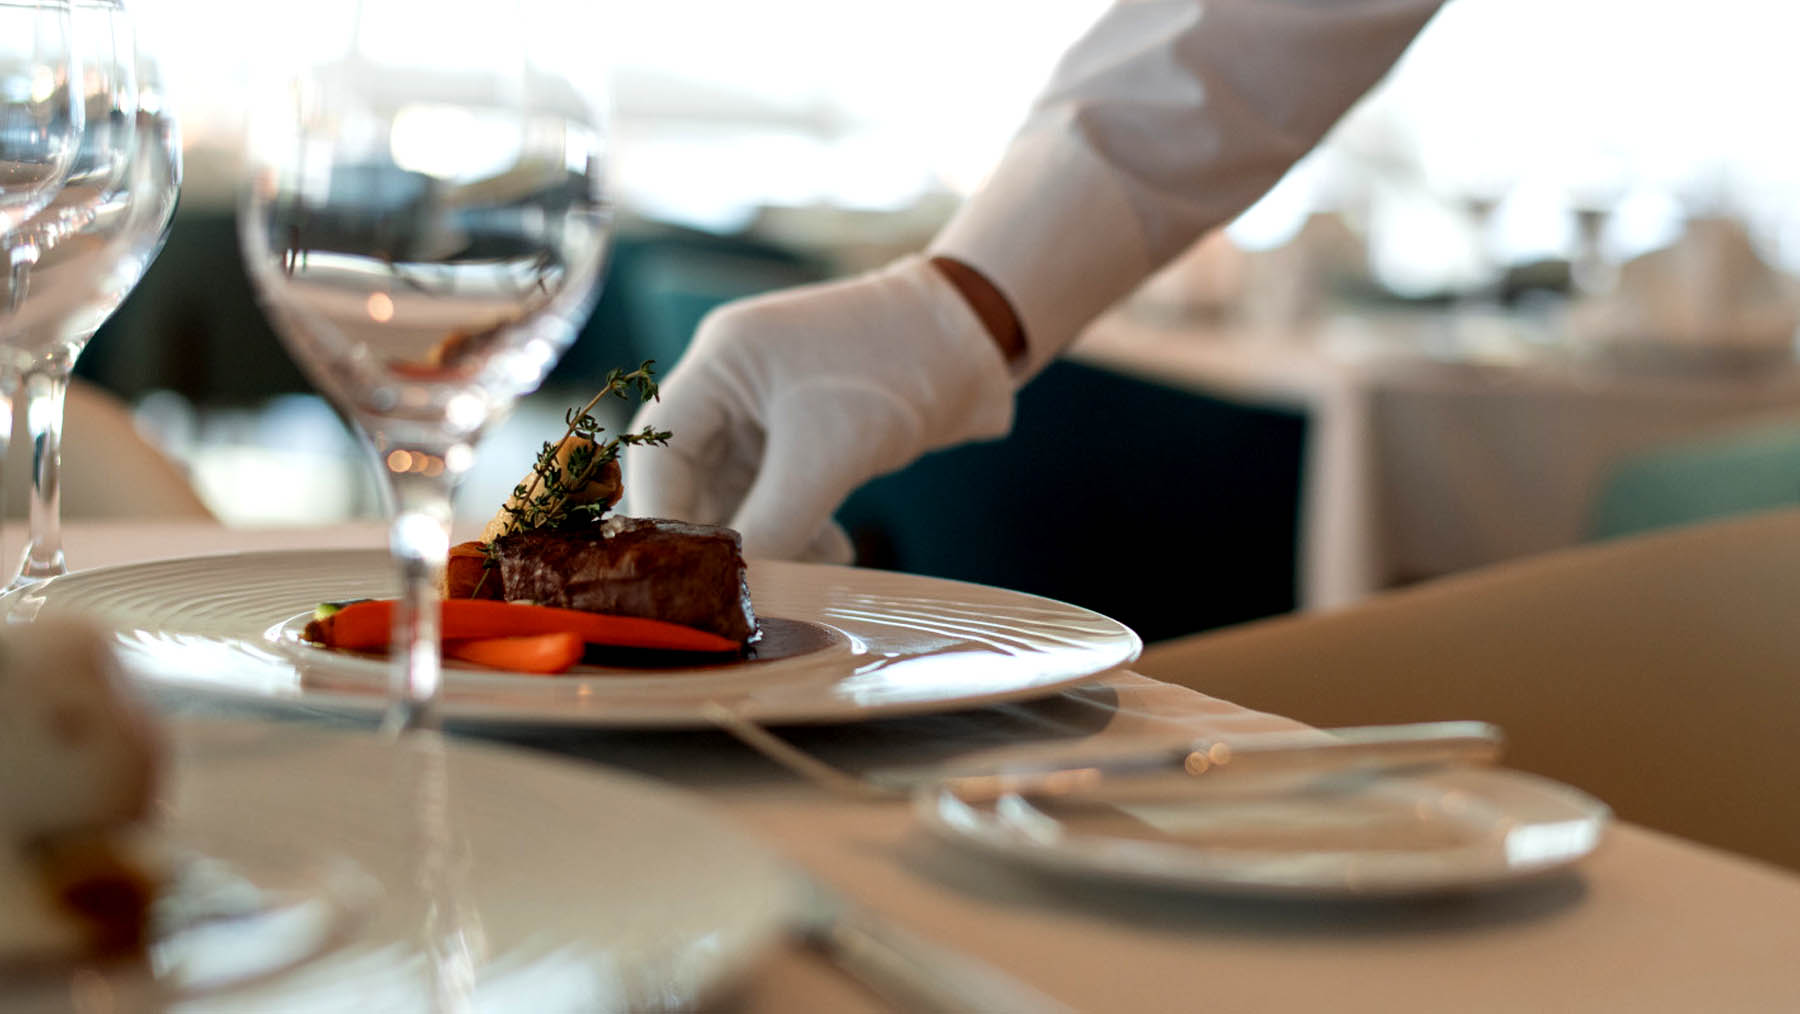 Guests are treated to a sumptuous meal aboard Ponant luxury ship.